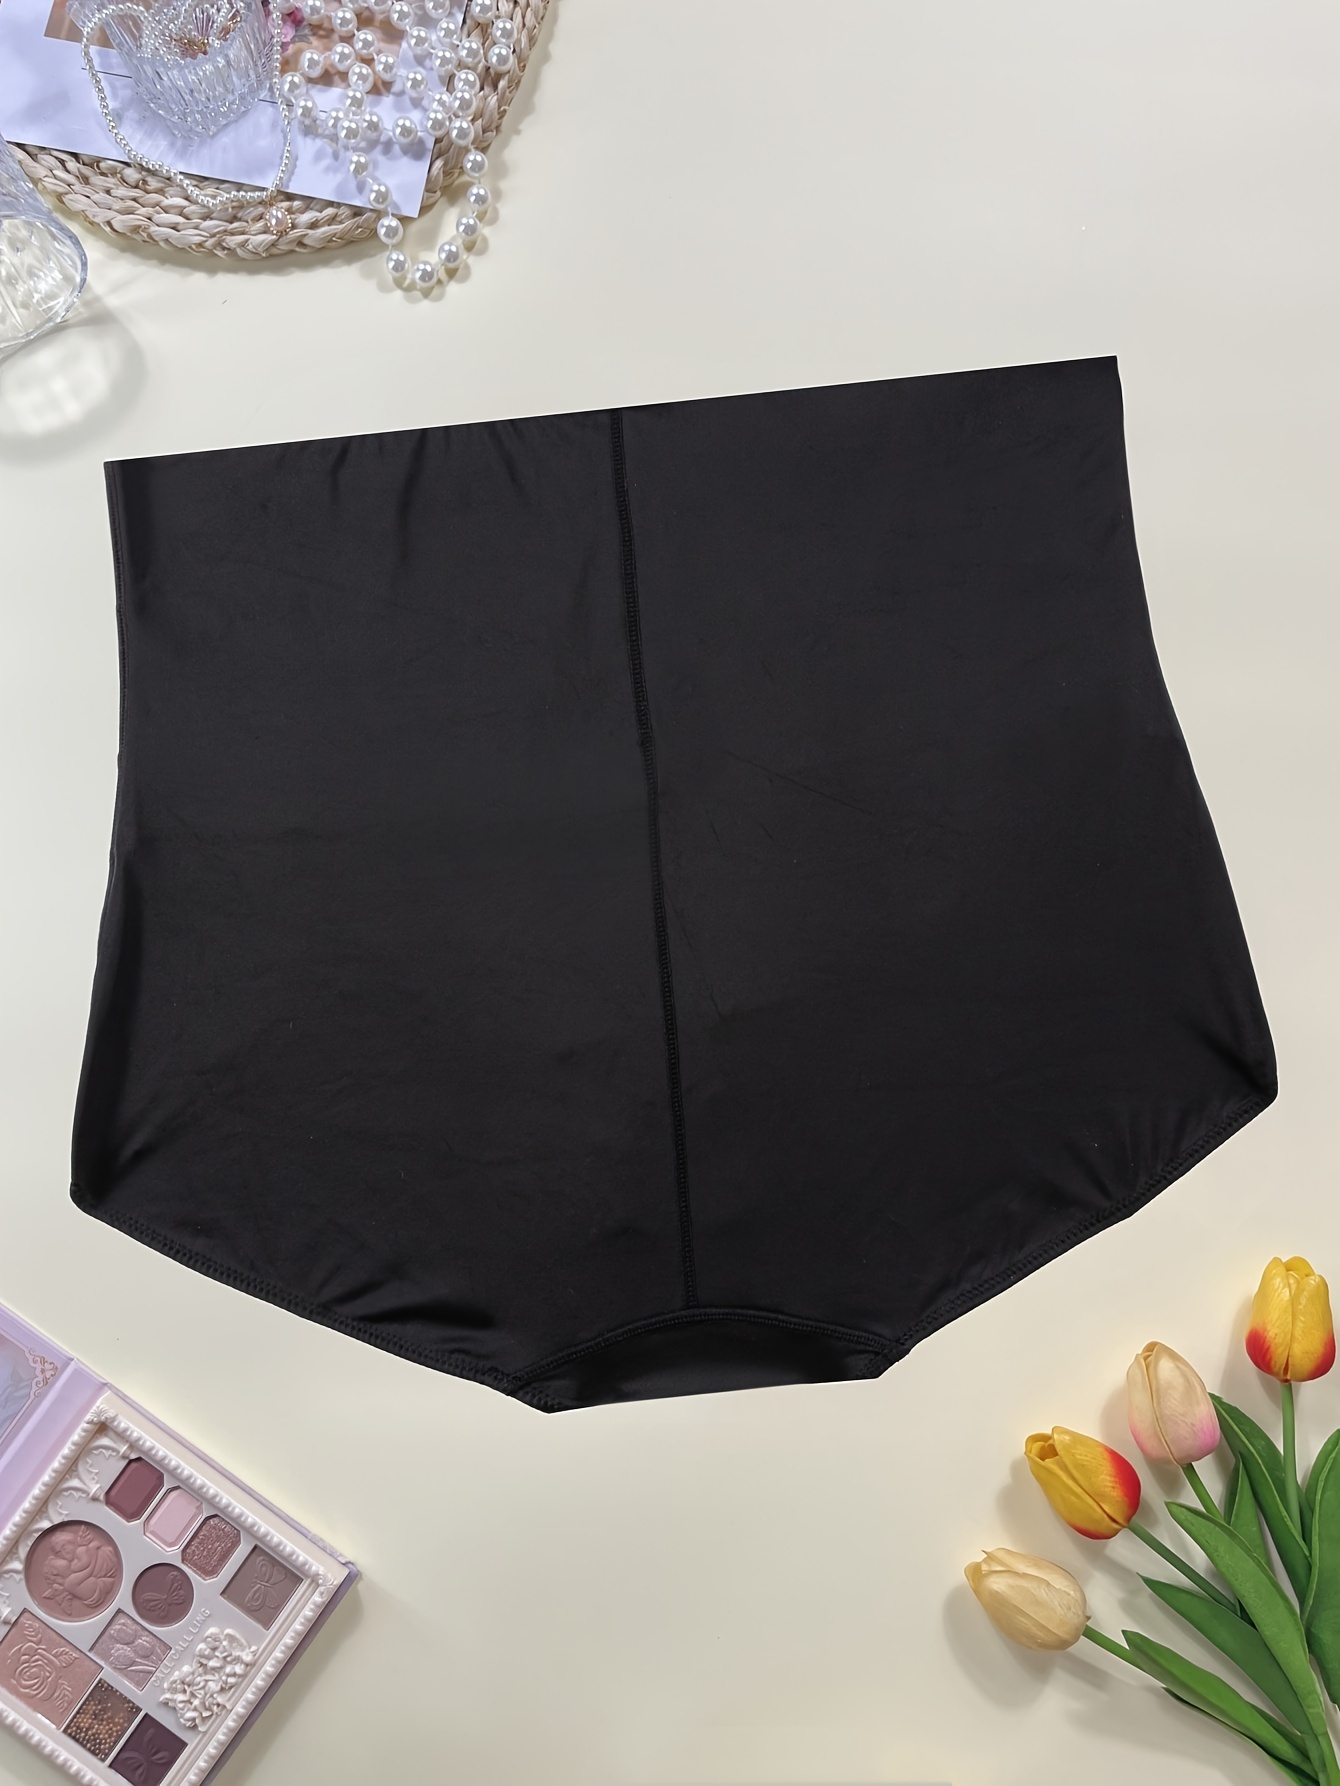 BUY1 TAKE1 ] Authentic Japan Honeycomb Slimming Panty, Butt Enhancing Panty,  Girdle, Gurdle, High Waist Slimming Plus Size, Waist Shaper, Belly Control,  Underwear for Women ONE SIZE FITS ALL